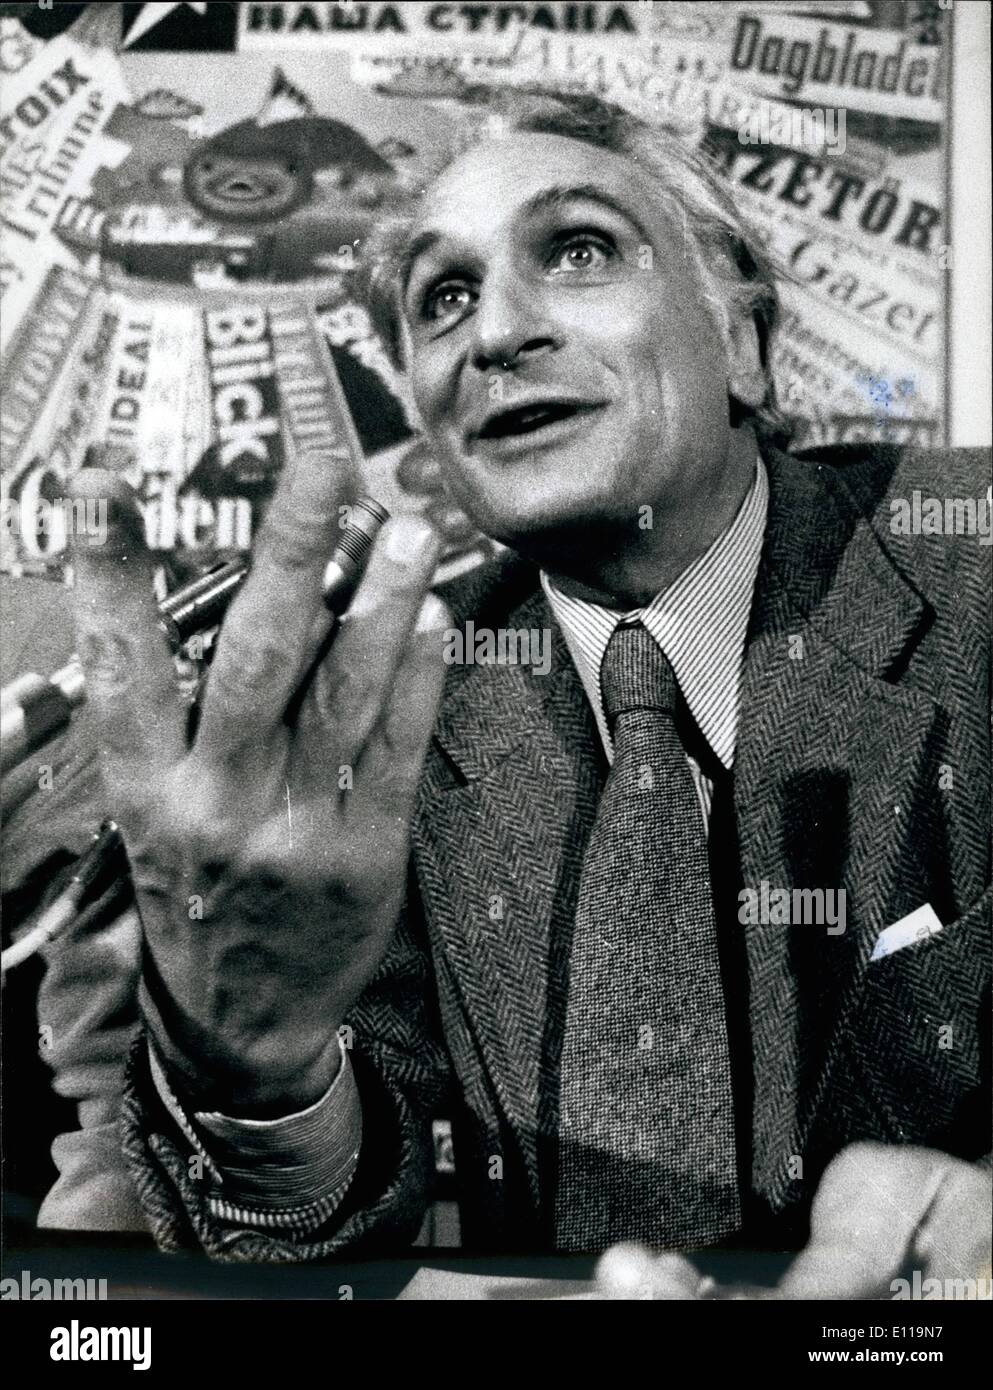 May 05, 1976 - Rome : The leader of the Radical Party, the newsman Marco Pannella, who in the center of the numerous action, as Stock Photo